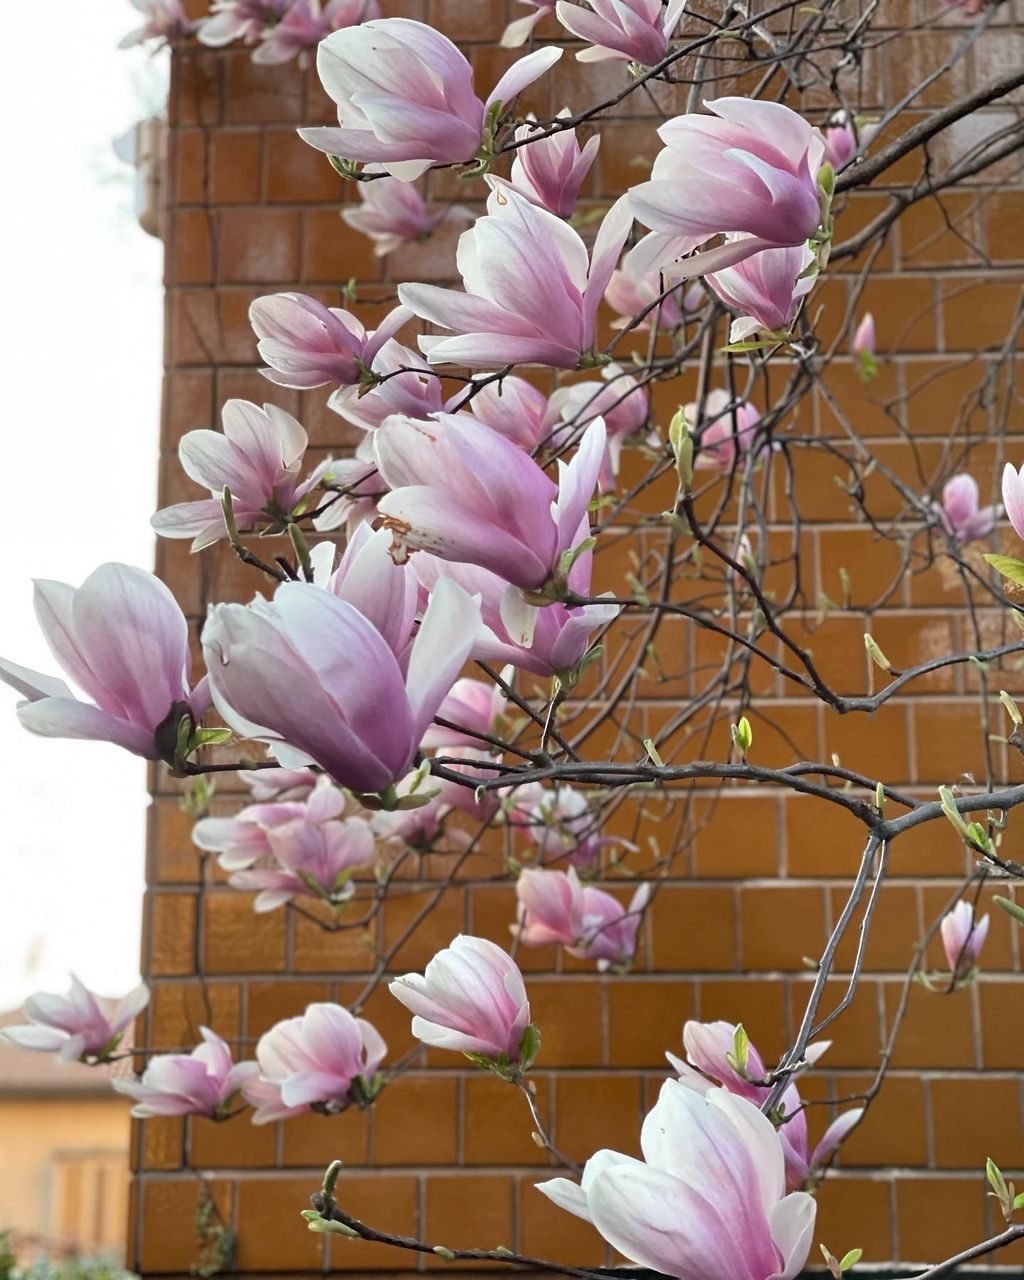 CLOSE-UP OF PINK FLOWERING PLANT AGAINST PURPLE WALL